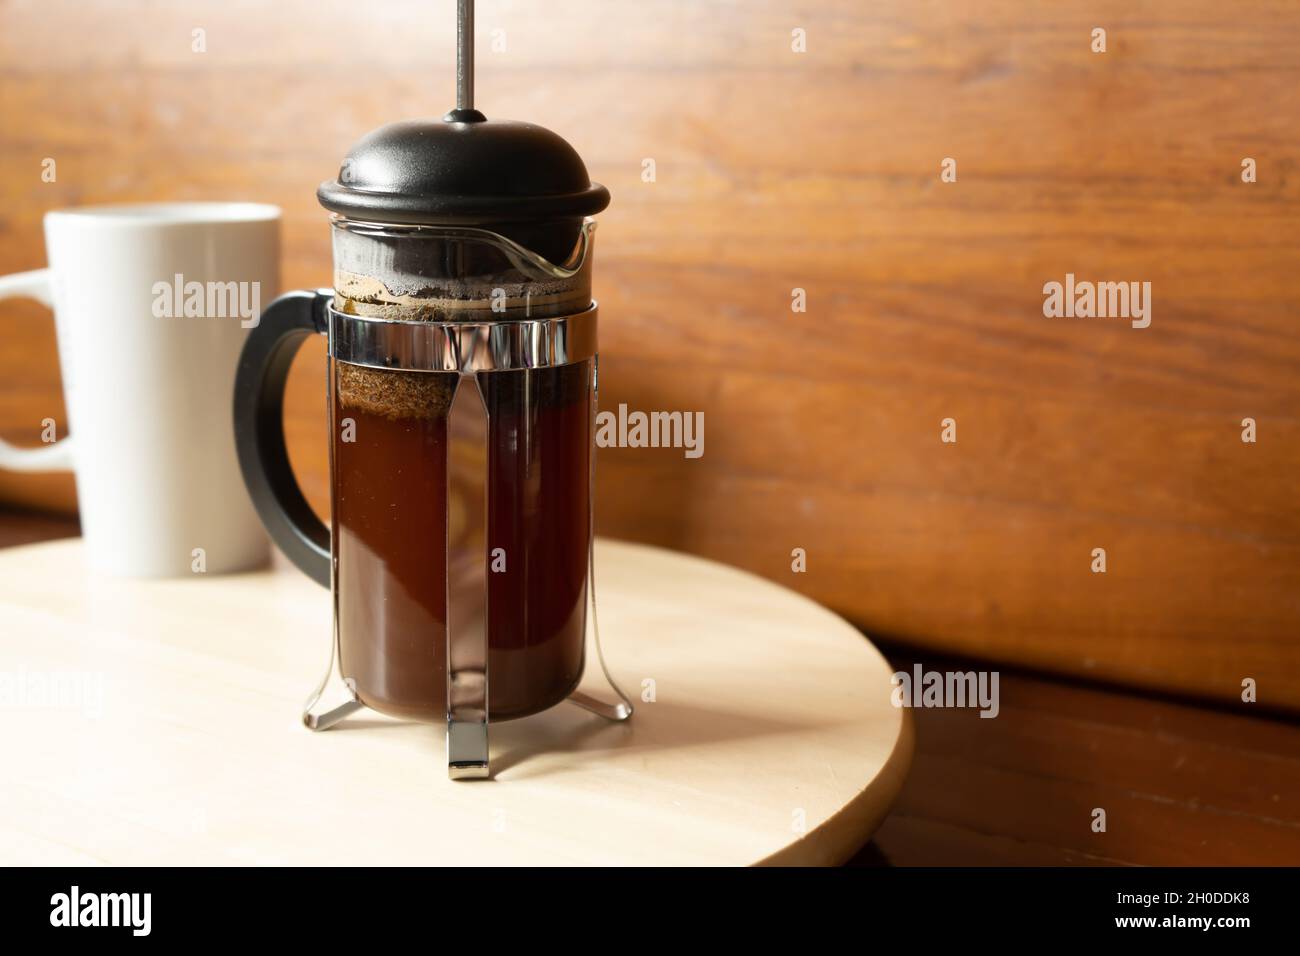 Making coffee with French press method Stock Photo